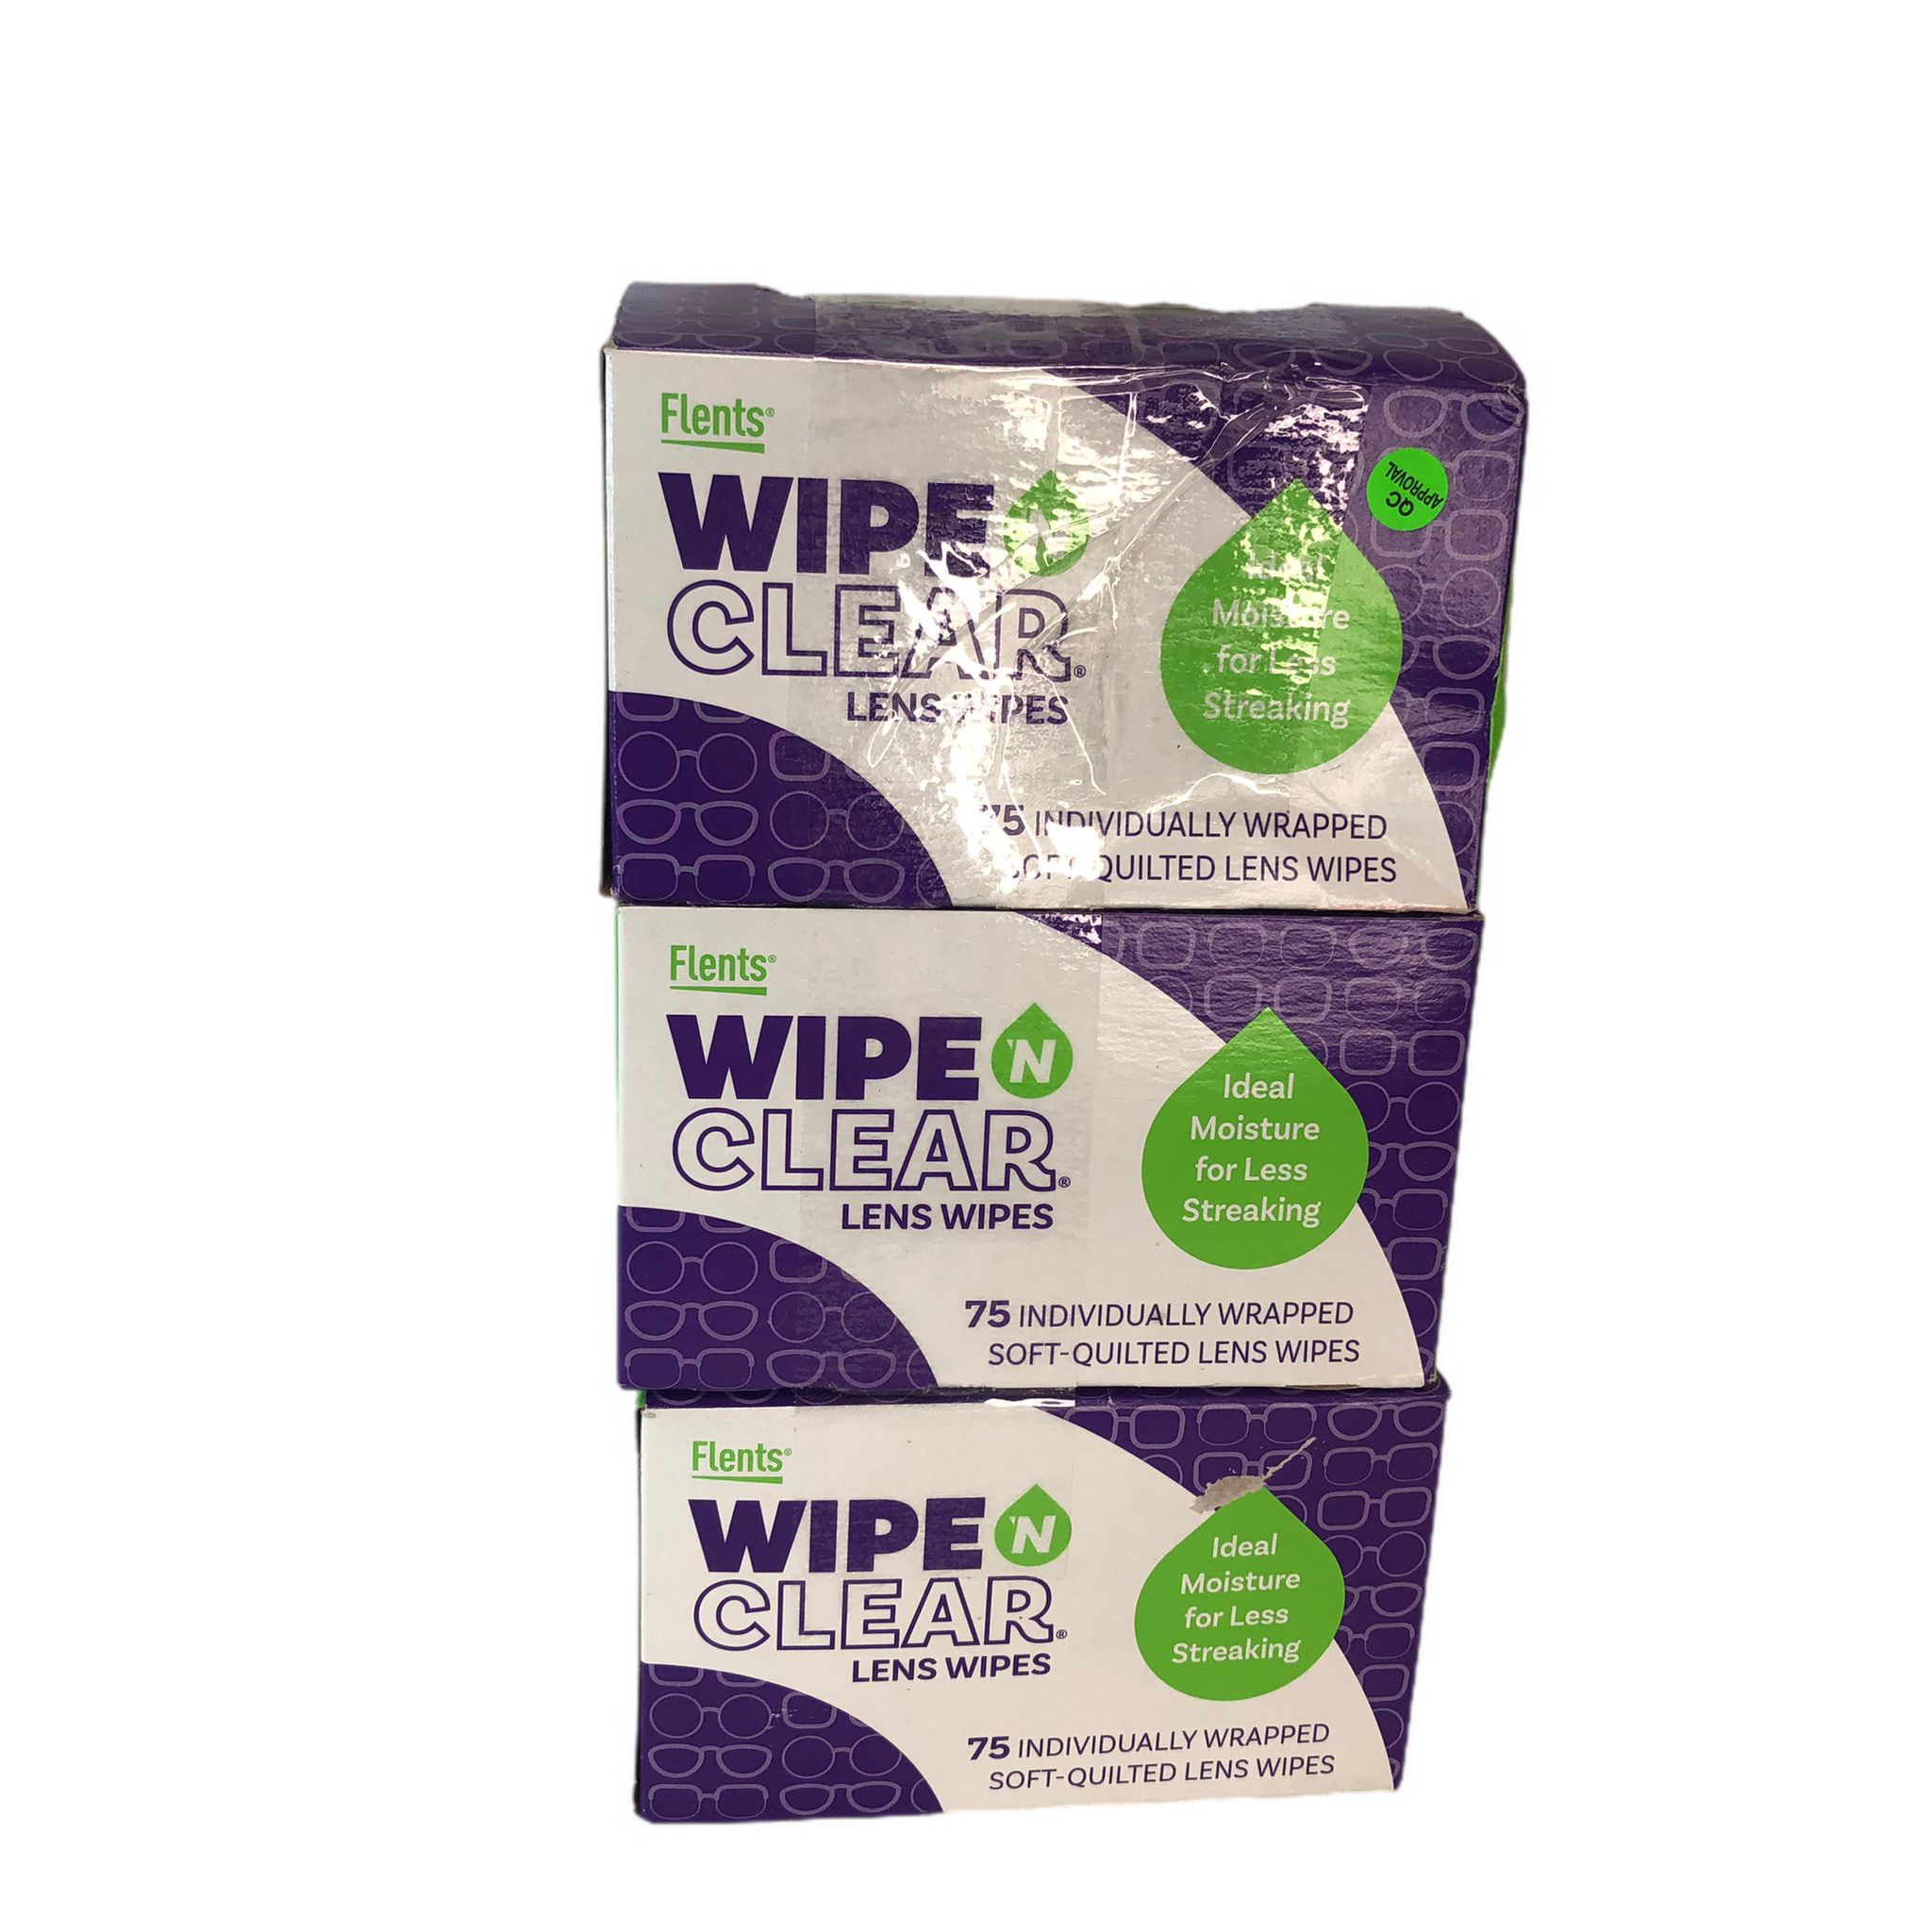 As is Flent's Wipe 'n Clear Lens Wipe, 225 Soft-Quilted Lens Wipes